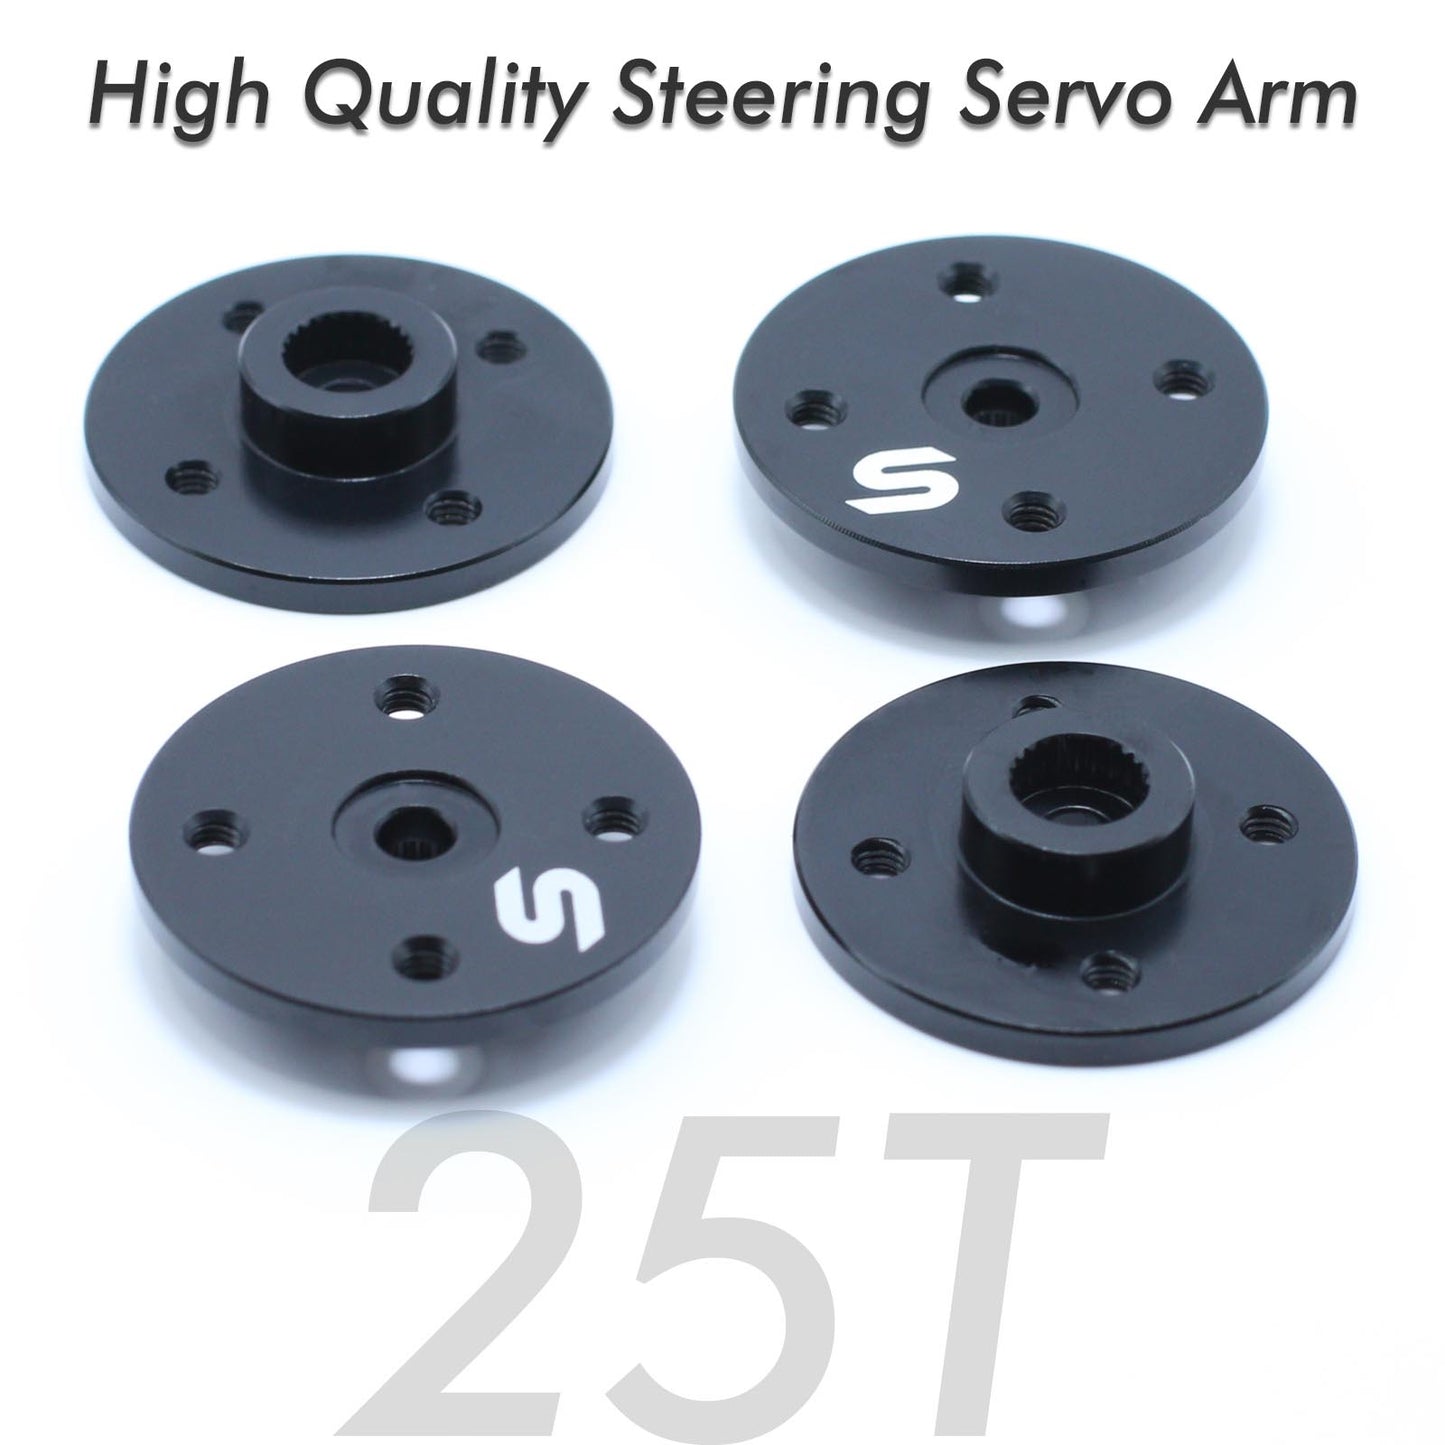 Sincecam 25T Round Type Disc Steering Servo Horn 7075 High Quality  Aluminum Metal Servo Arm Compatible Sincecam Servo for RC Robot RC Scale Car Airplane -4 Pack